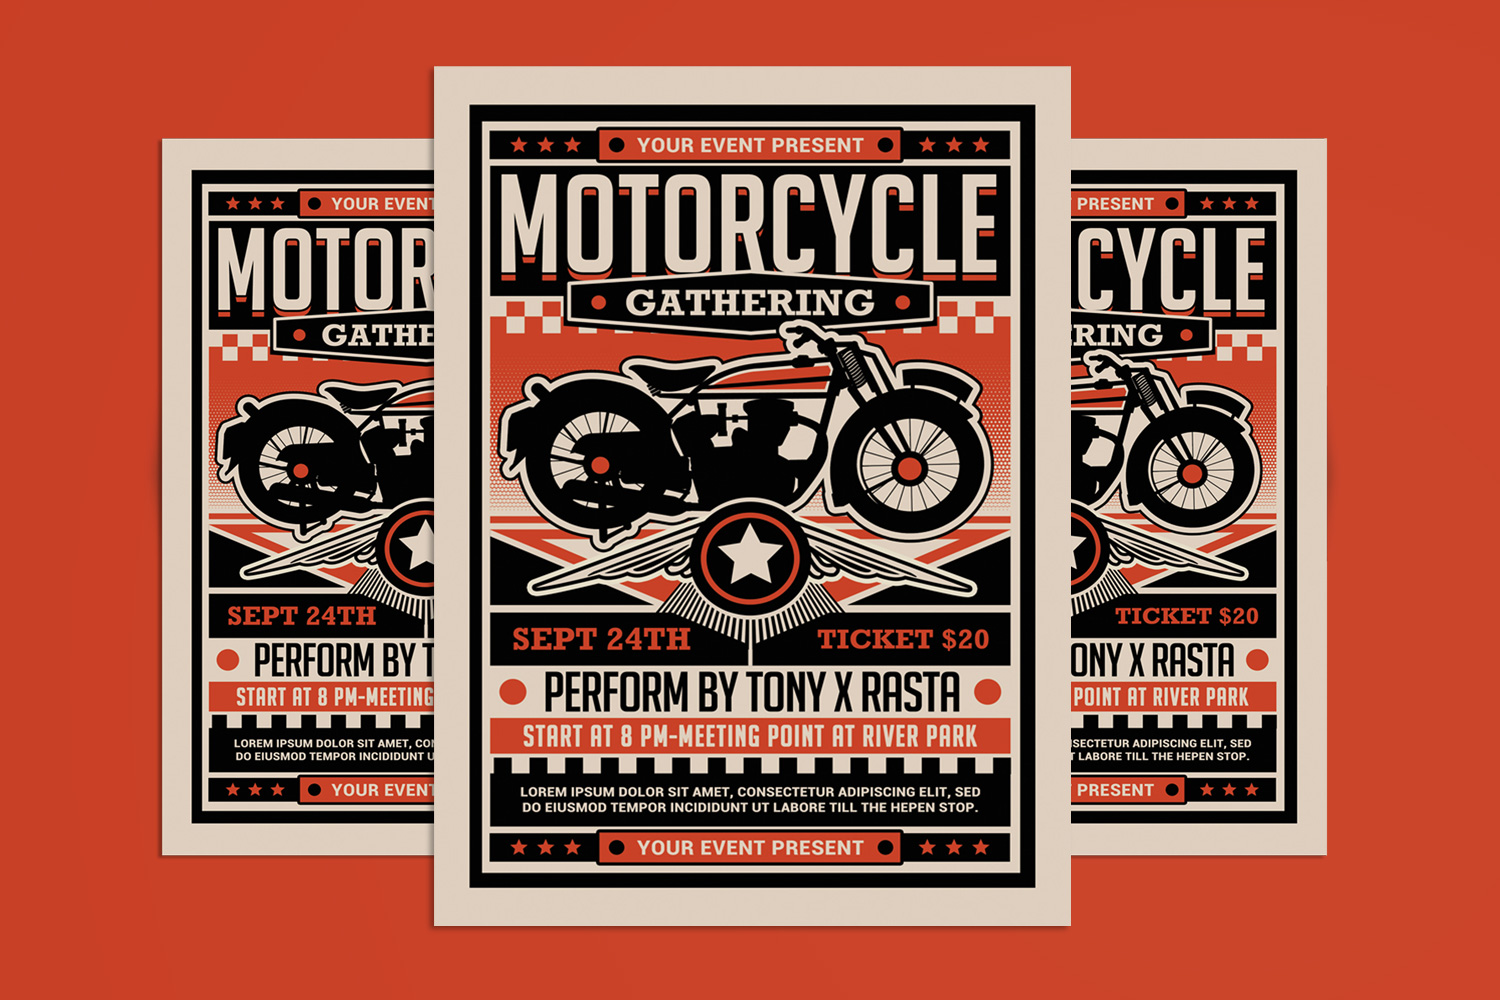 Motorcycle Club Gathering Event Flyer Template